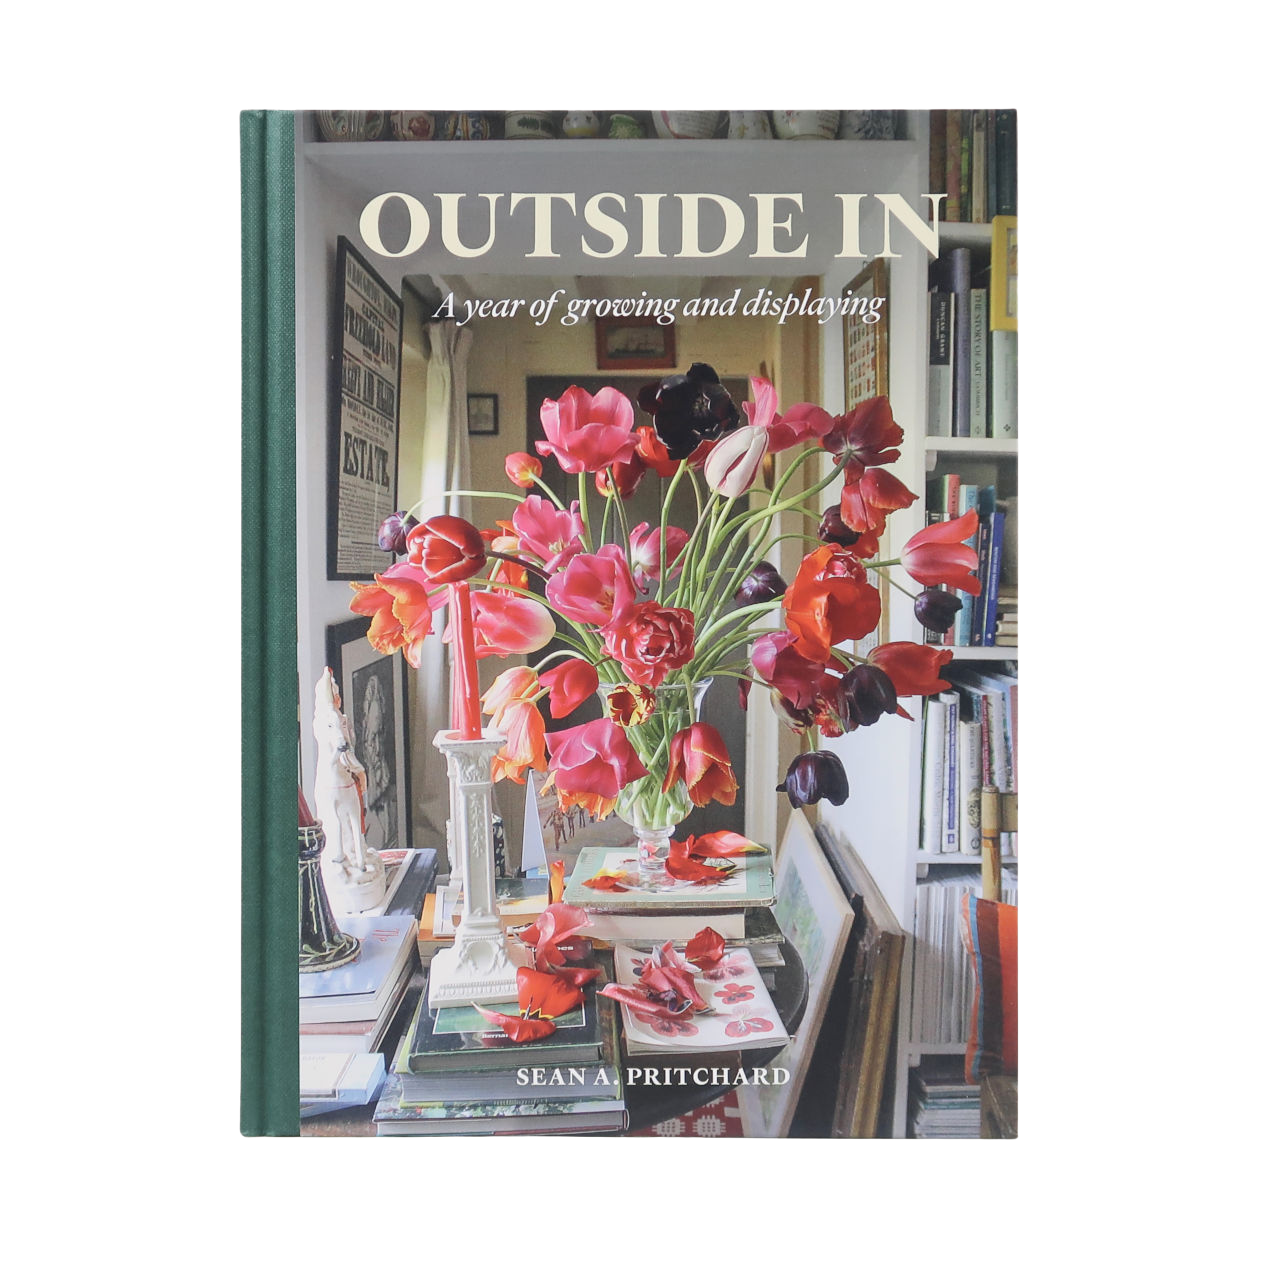 octopus-publishing-outside-in-a-year-of-growing-and-displaying-sean-a-pritchard